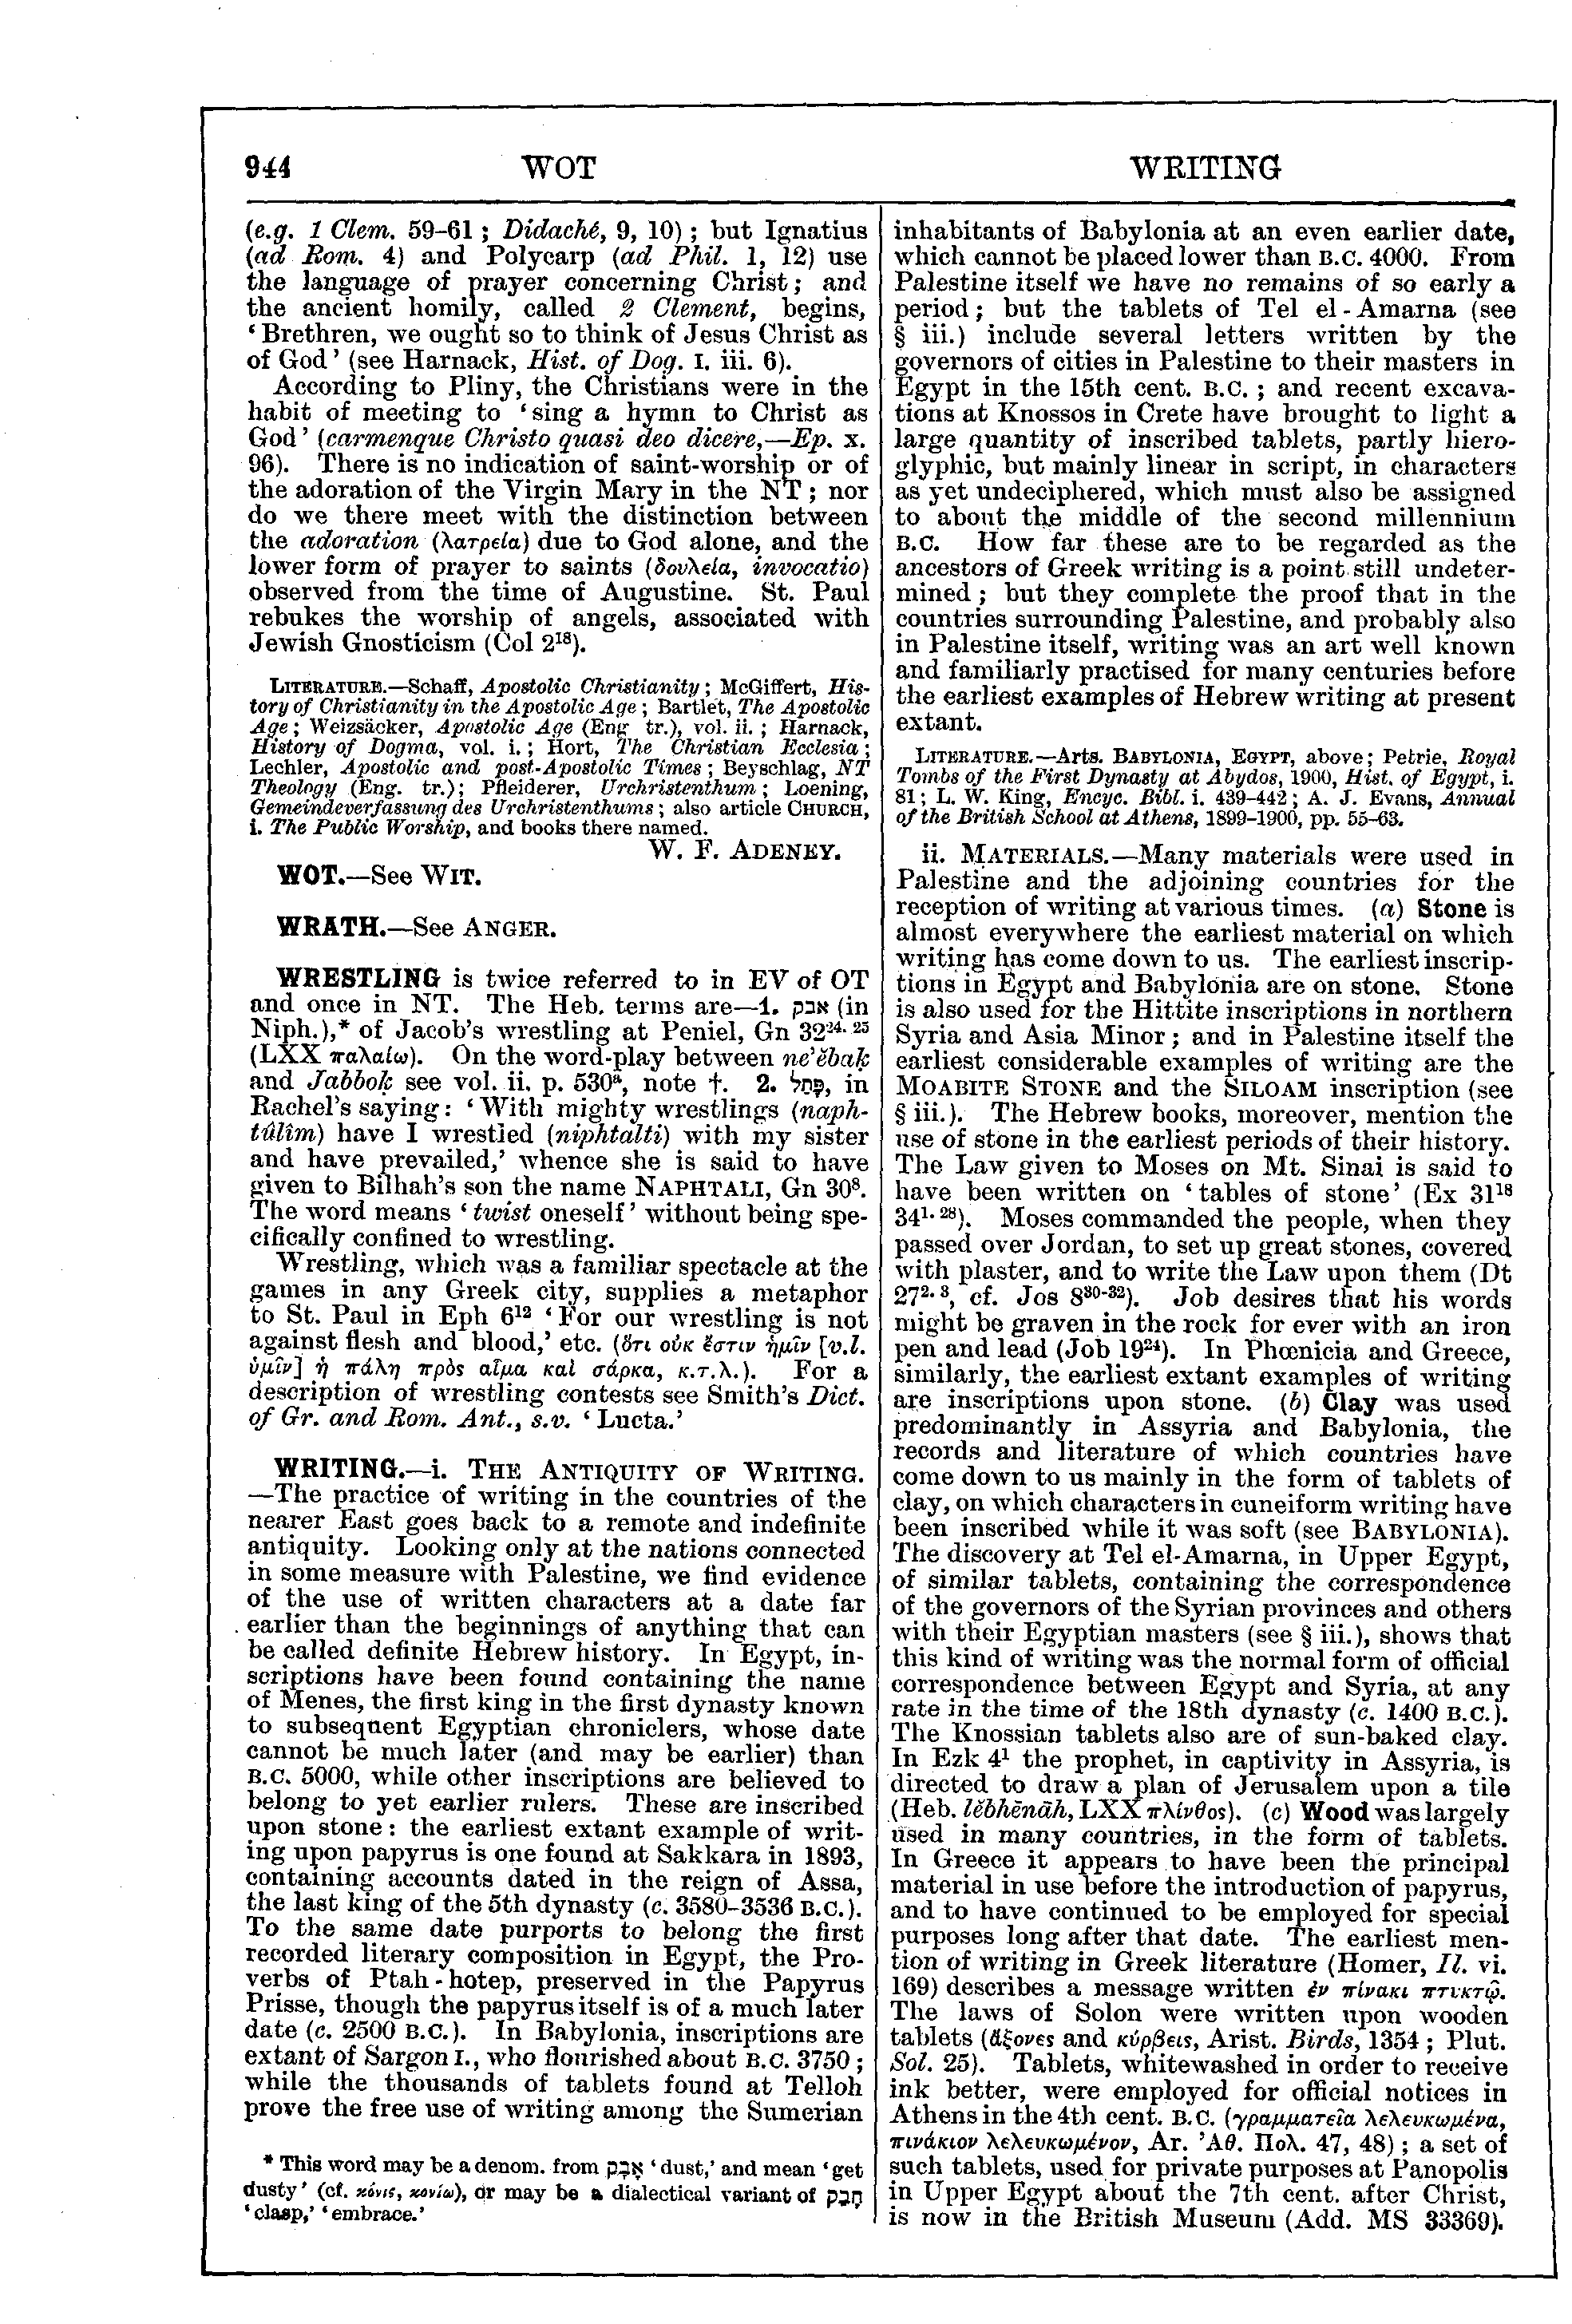 Image of page 944